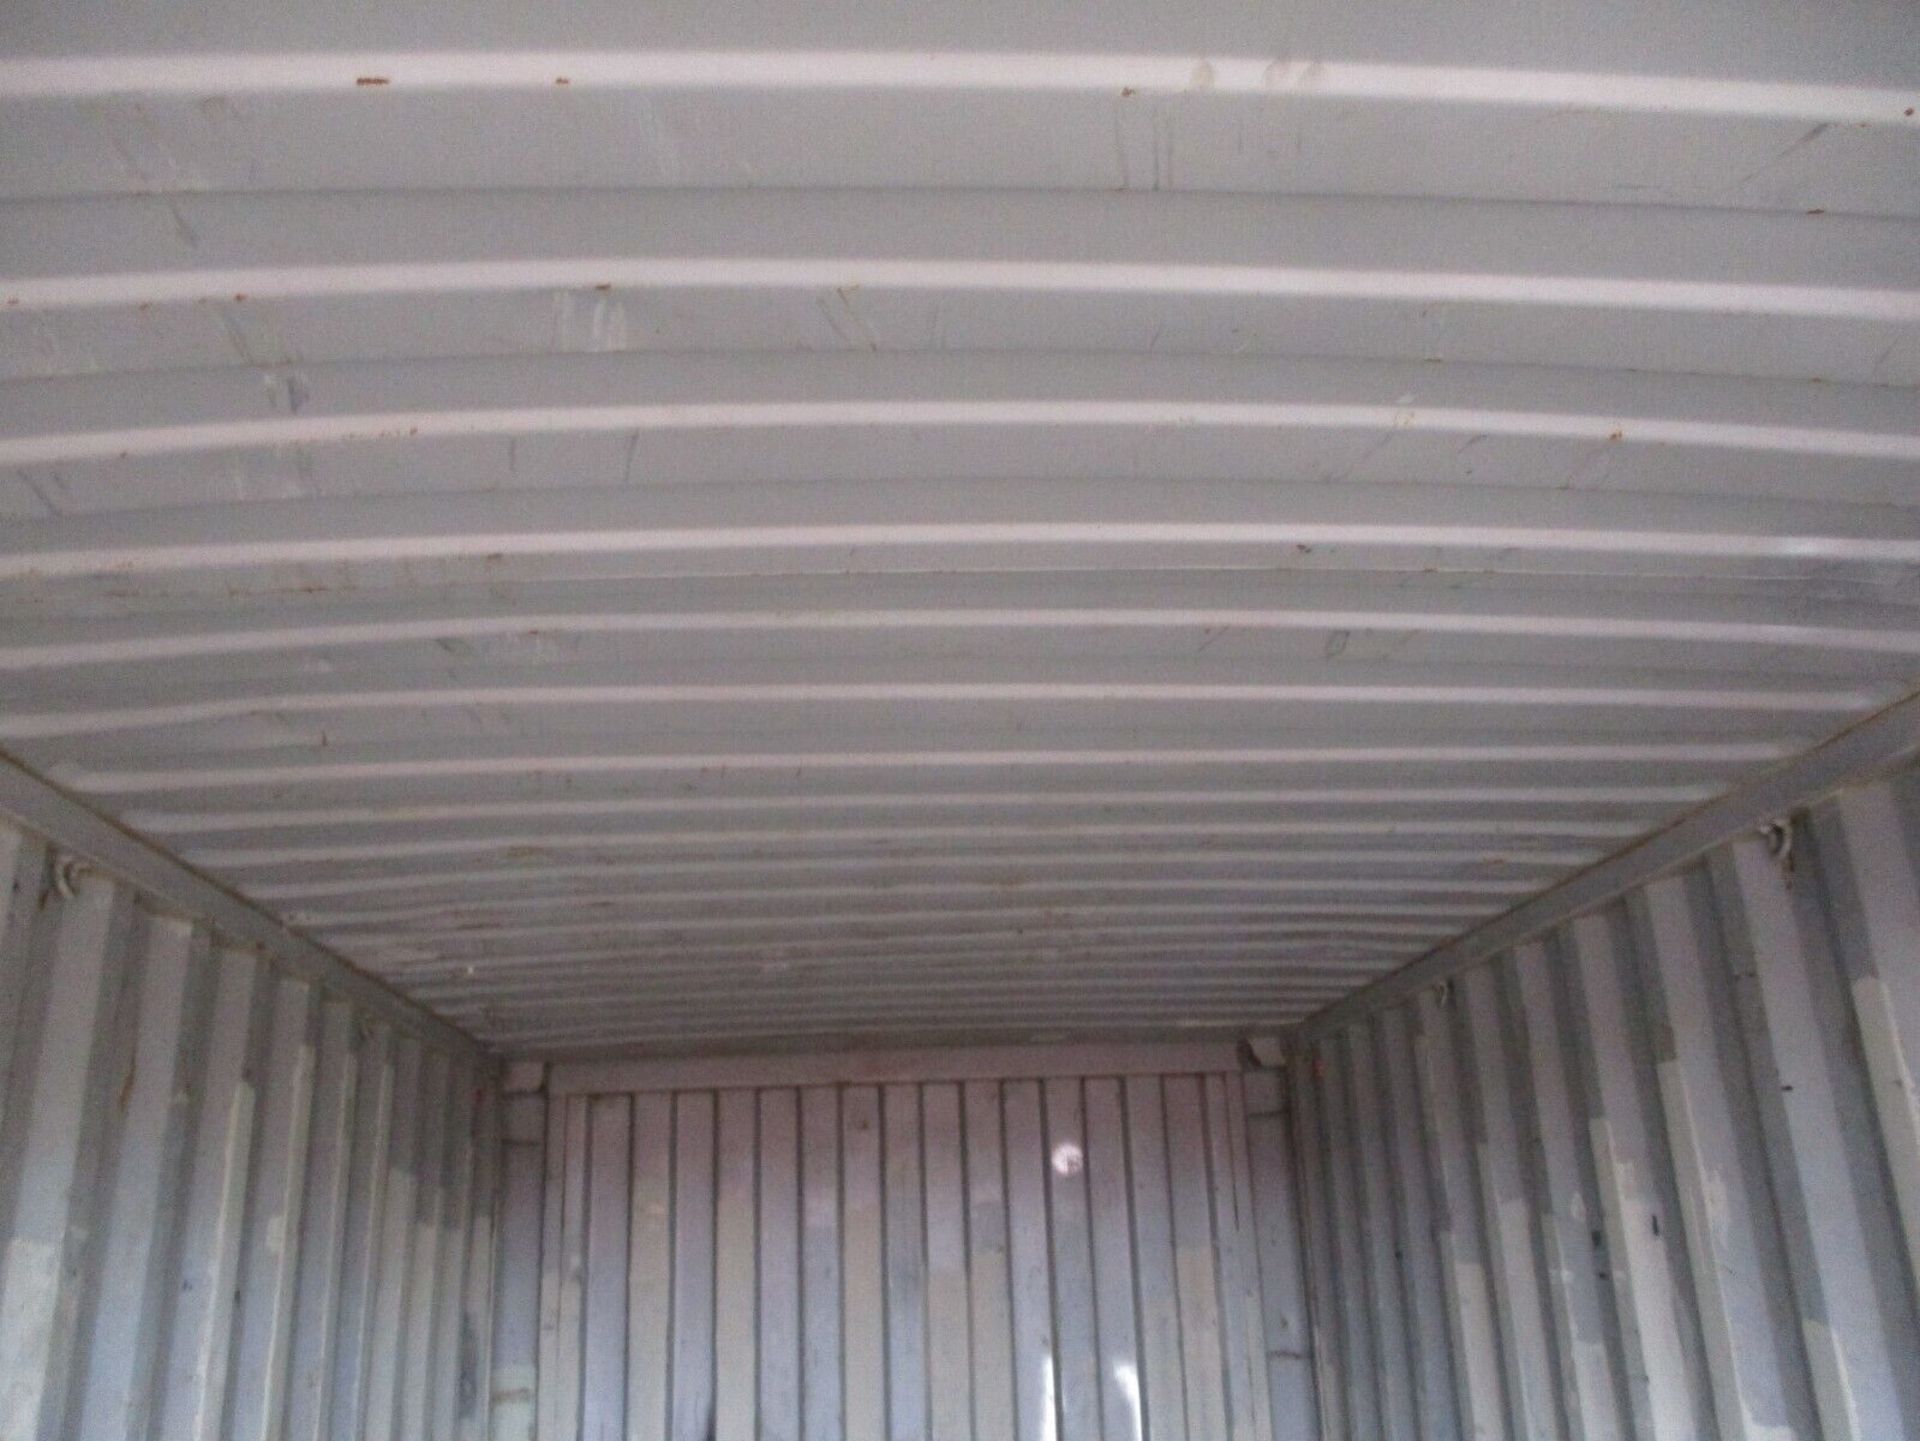 20 FEET LONG X 8 FEET WIDE SHIPPING CONTAINER - Image 12 of 13